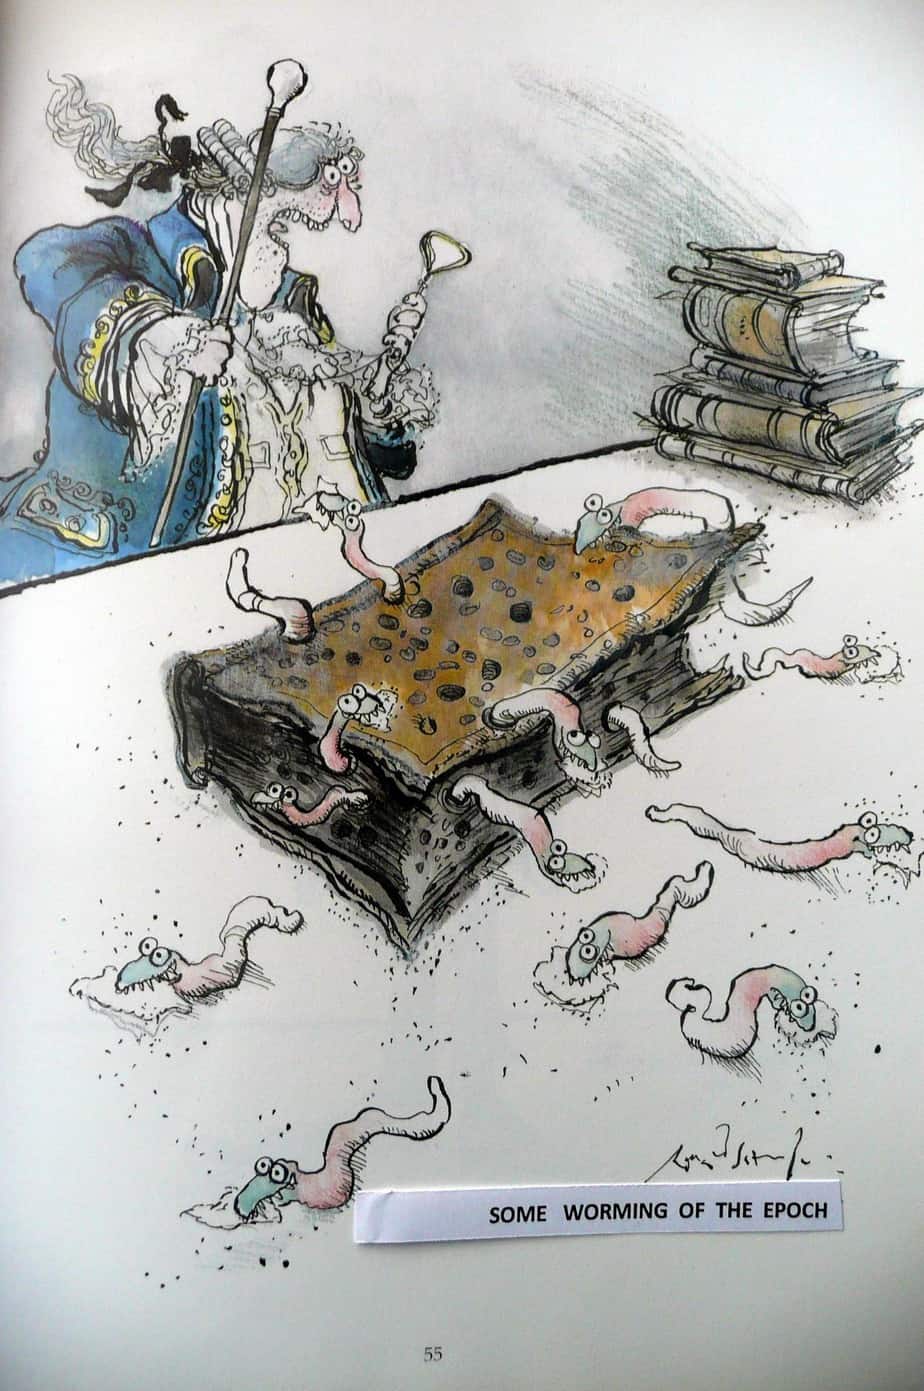 from 'Slightly Foxed - but still desirable - Ronald Searle's wicked world of Book Collecting' Souvenir Press 1989